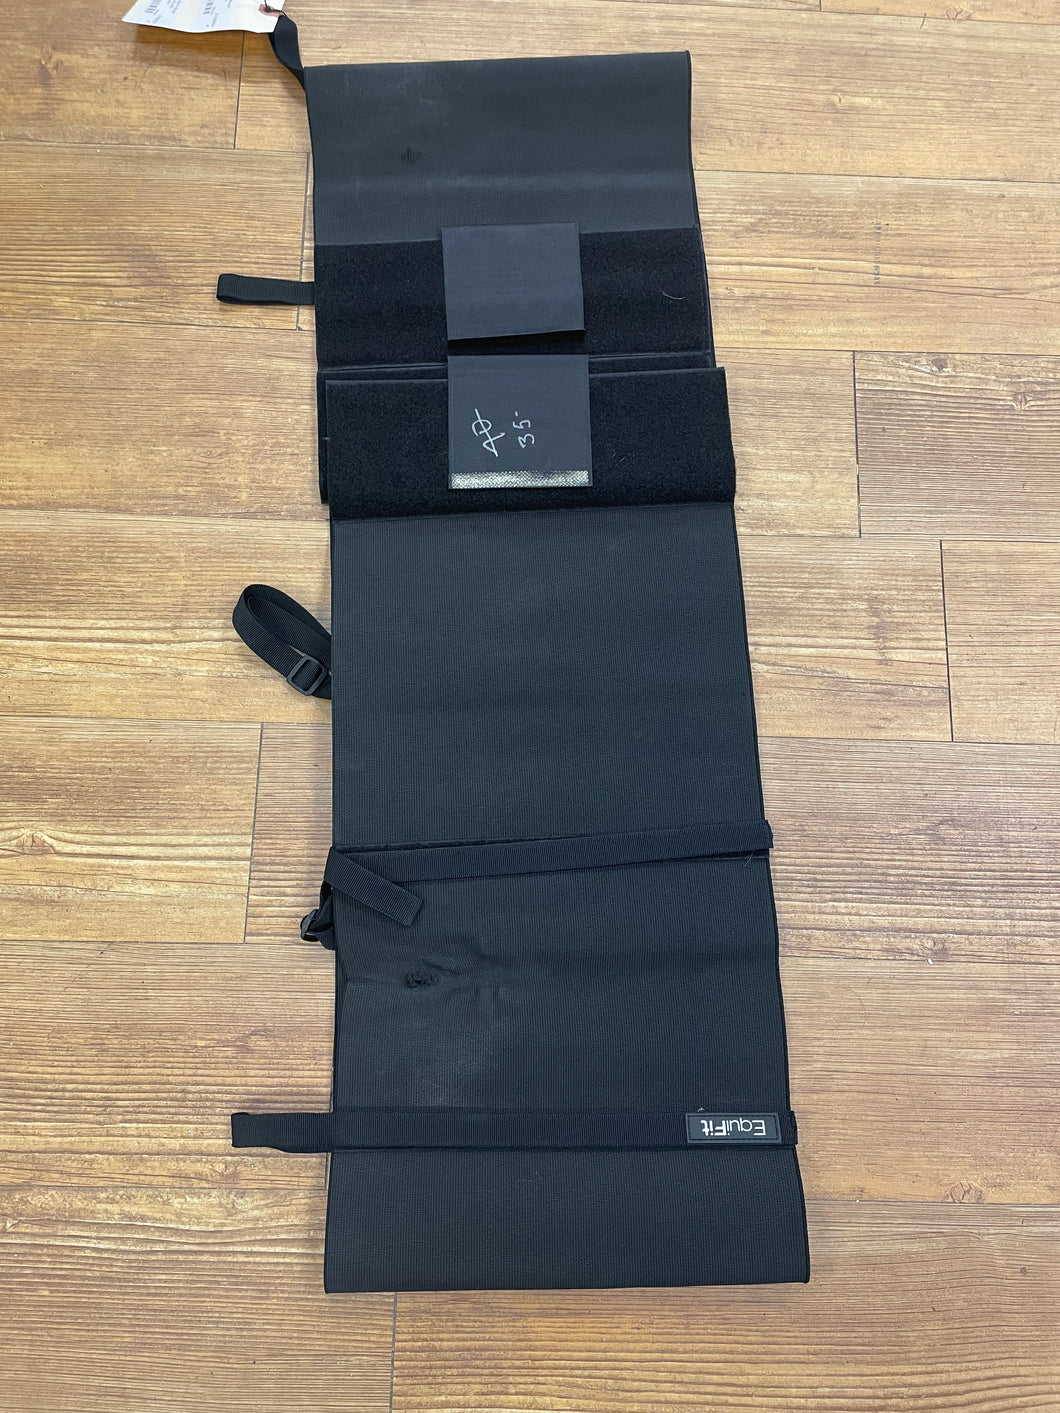 Used Equifit BellyBand #16577